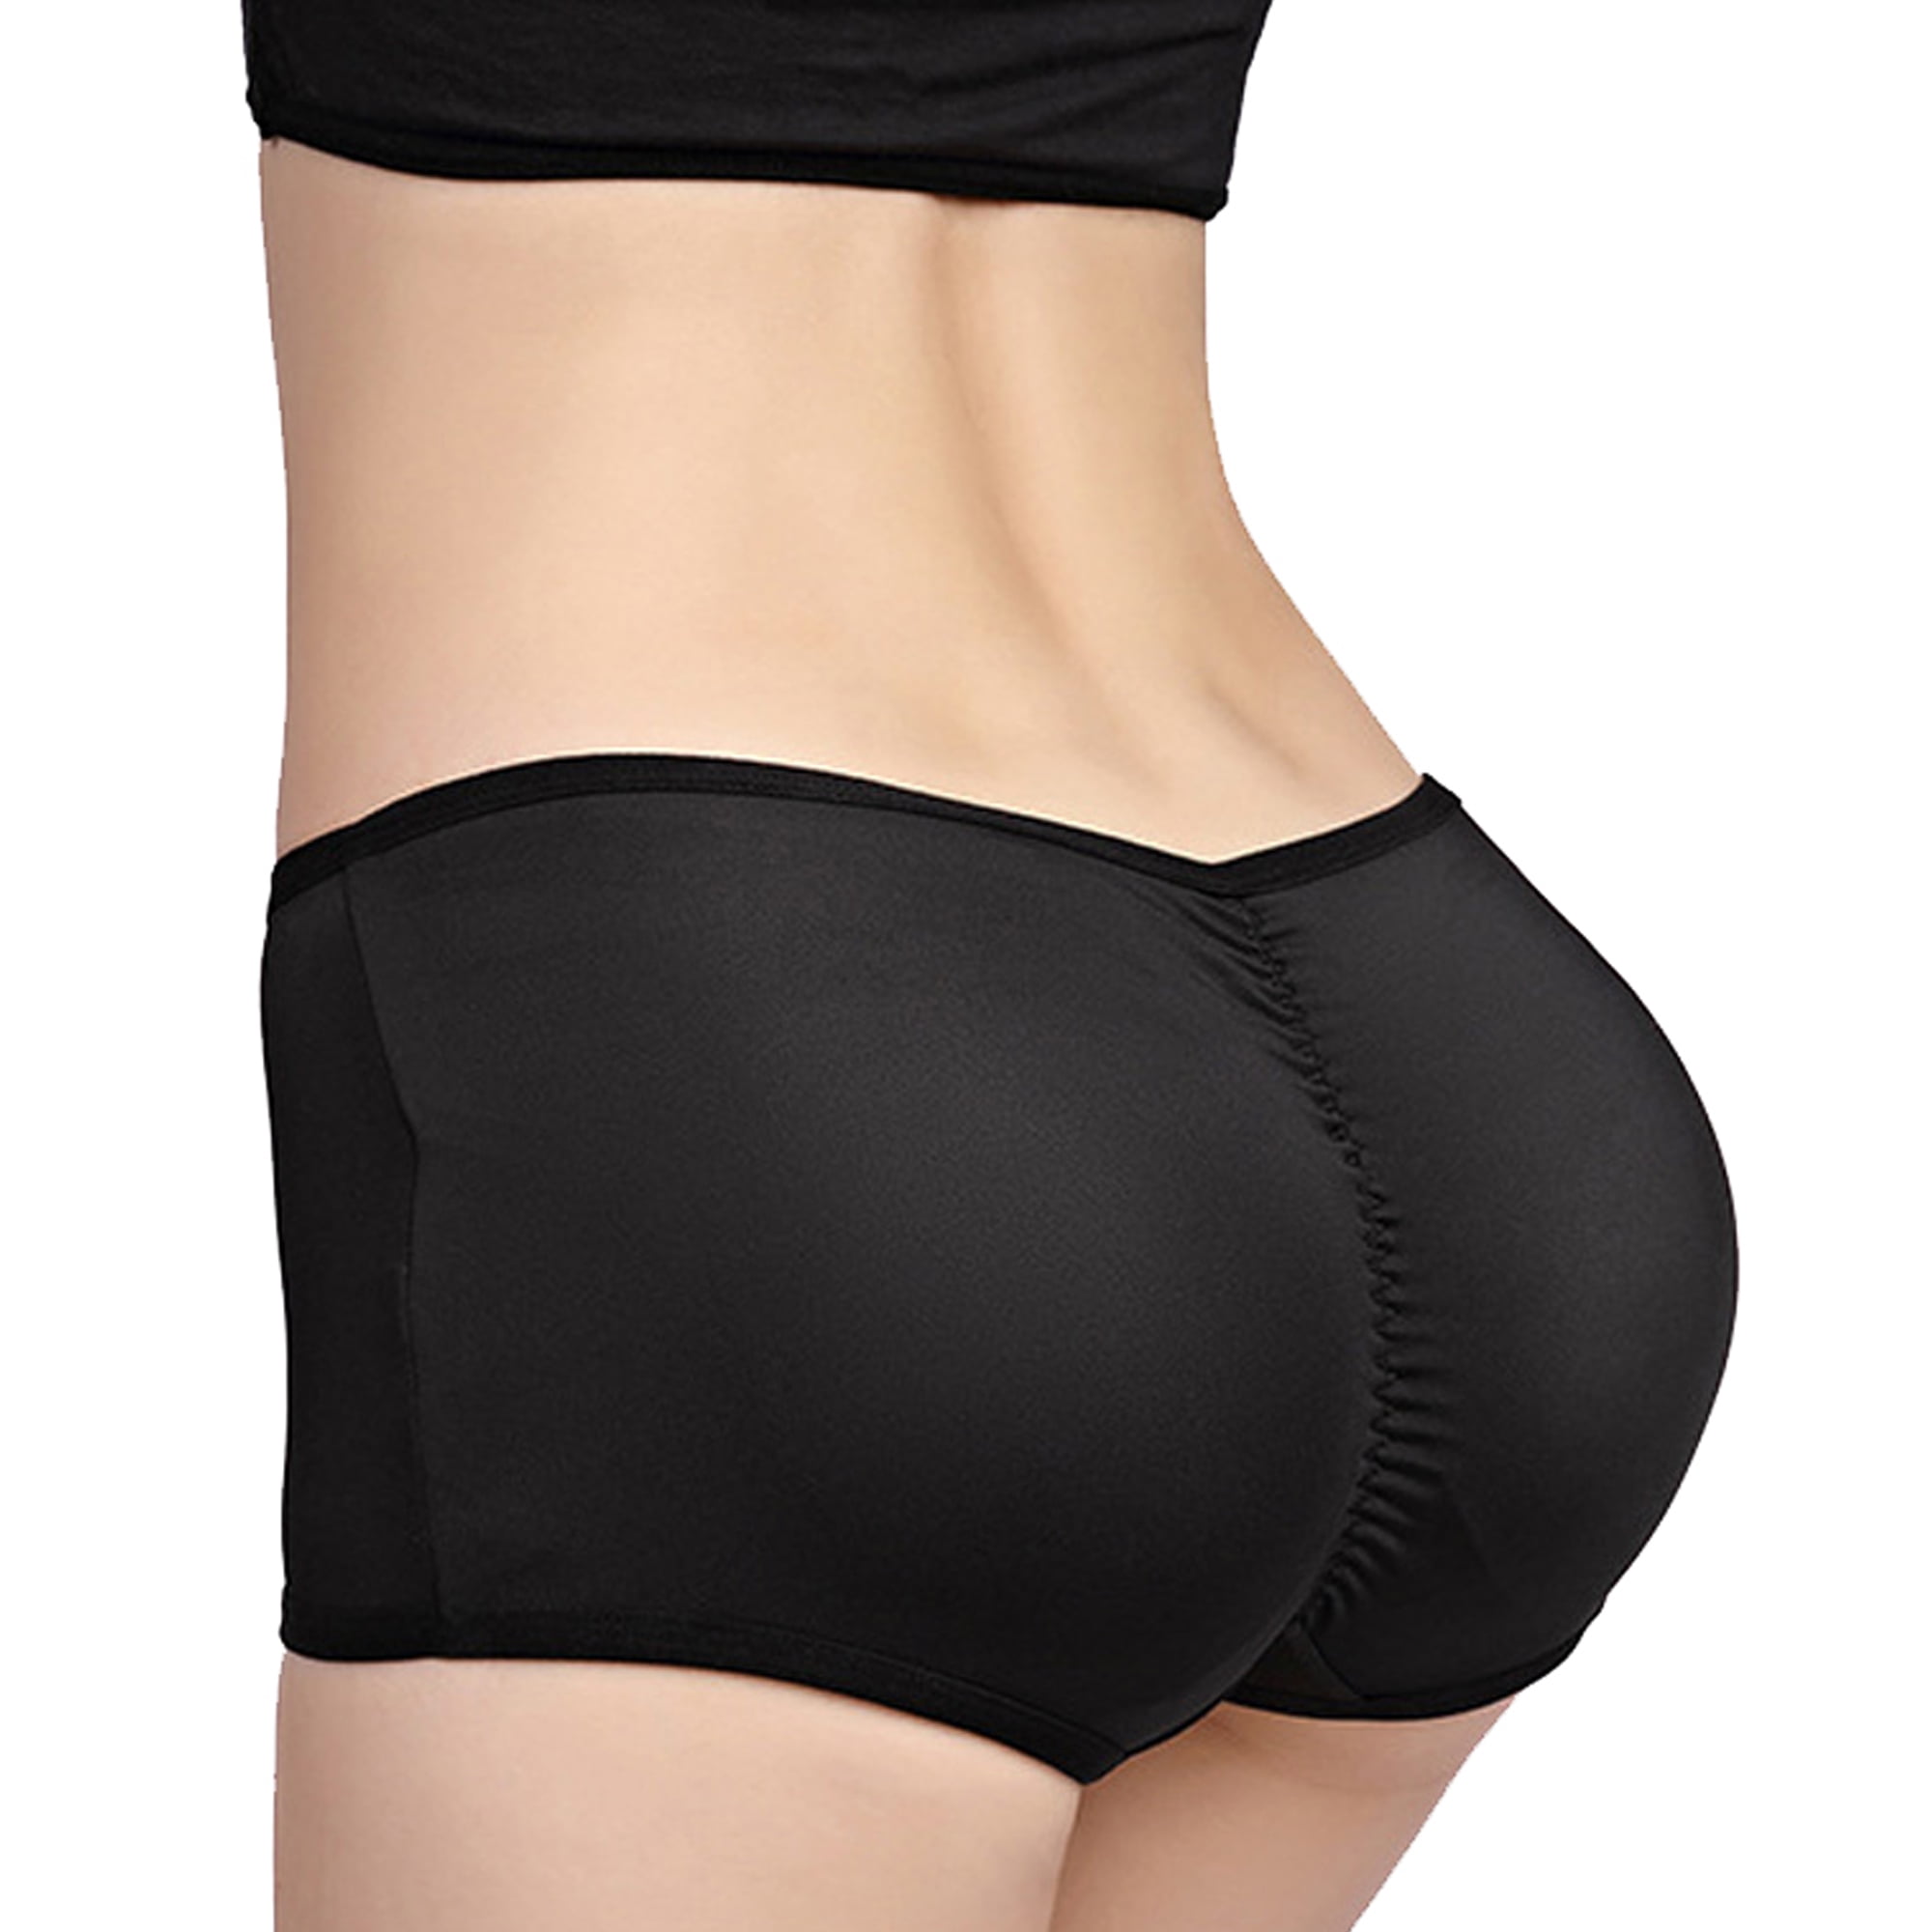 100% Silicone Padded Butt and Hip Enhancer BOOTY Pads Panties Push Up Removable